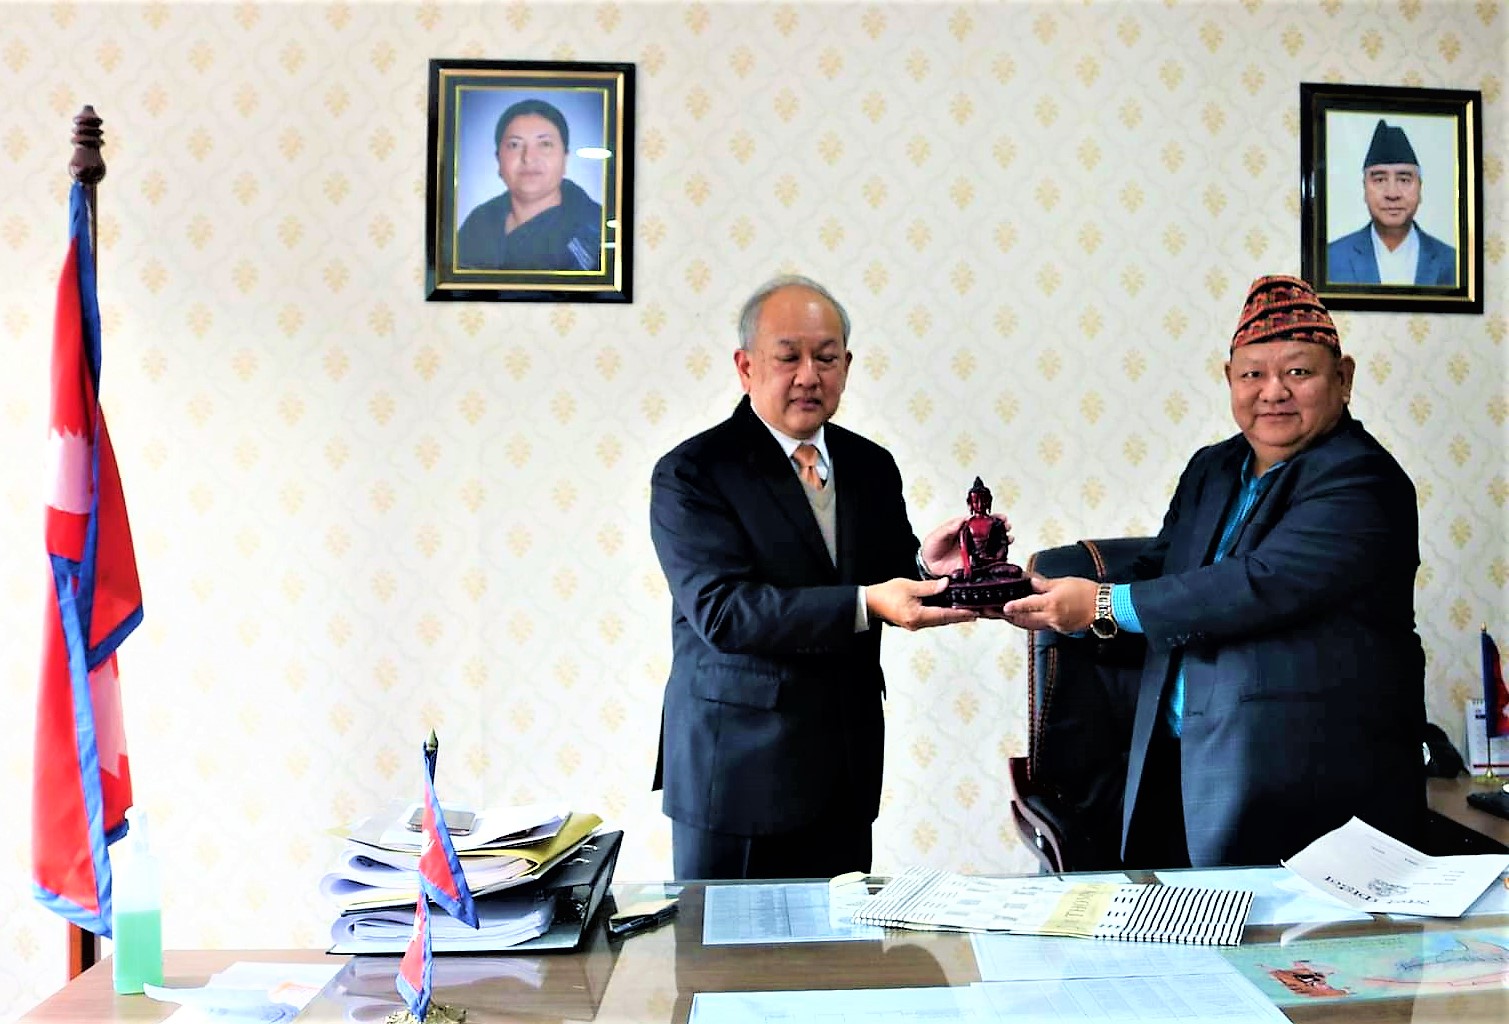 Minister Ale and Thai envoy exchanging gift at the Minister’s chamber Thursday. Ministry photo